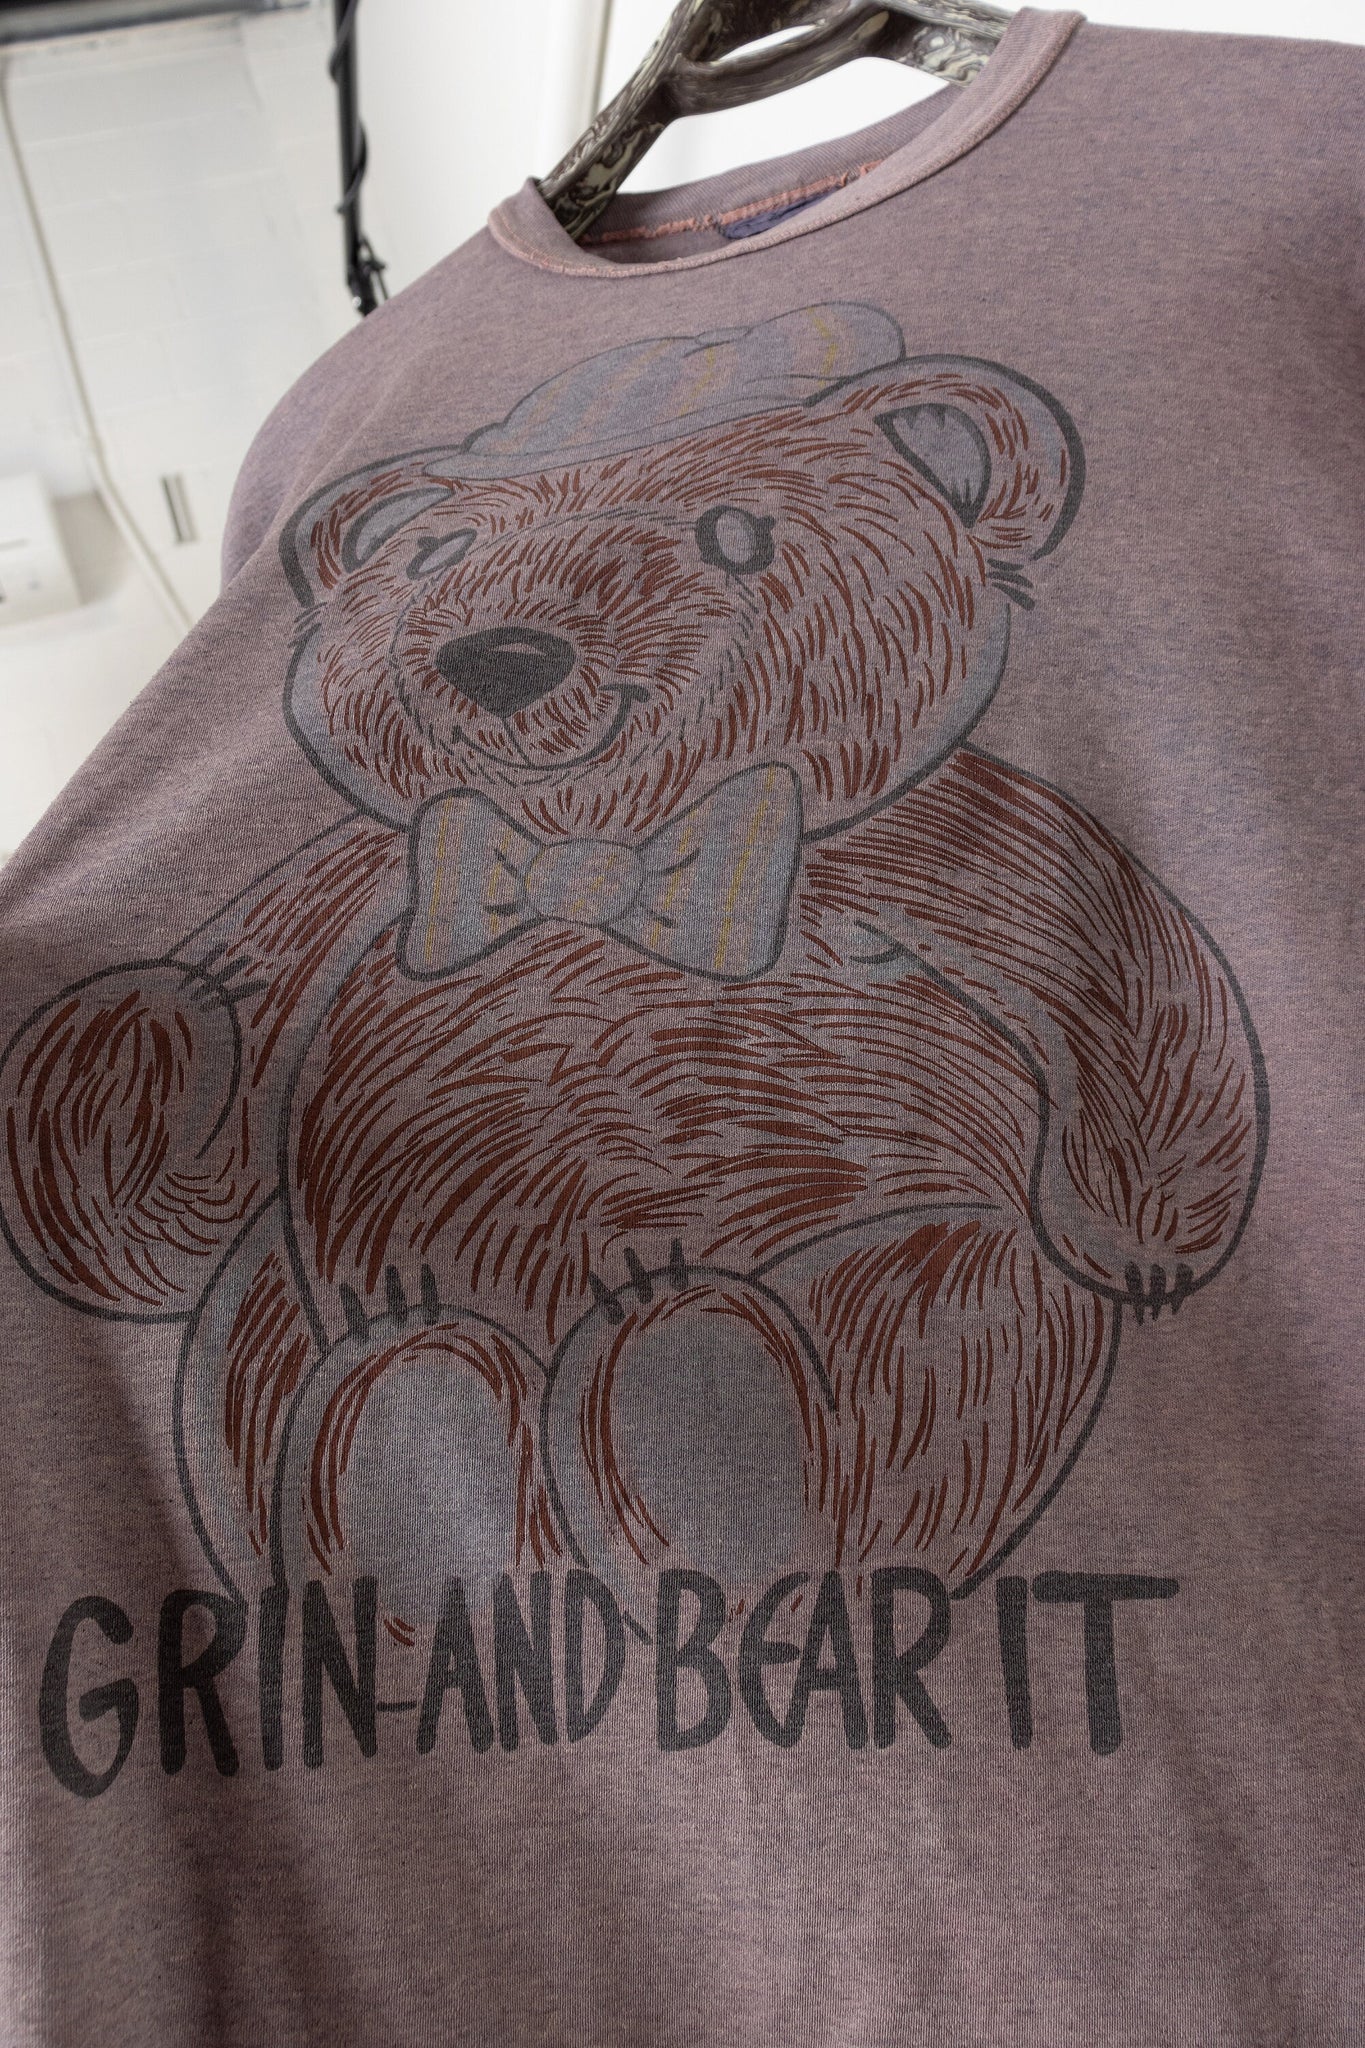 Grin And Bear It